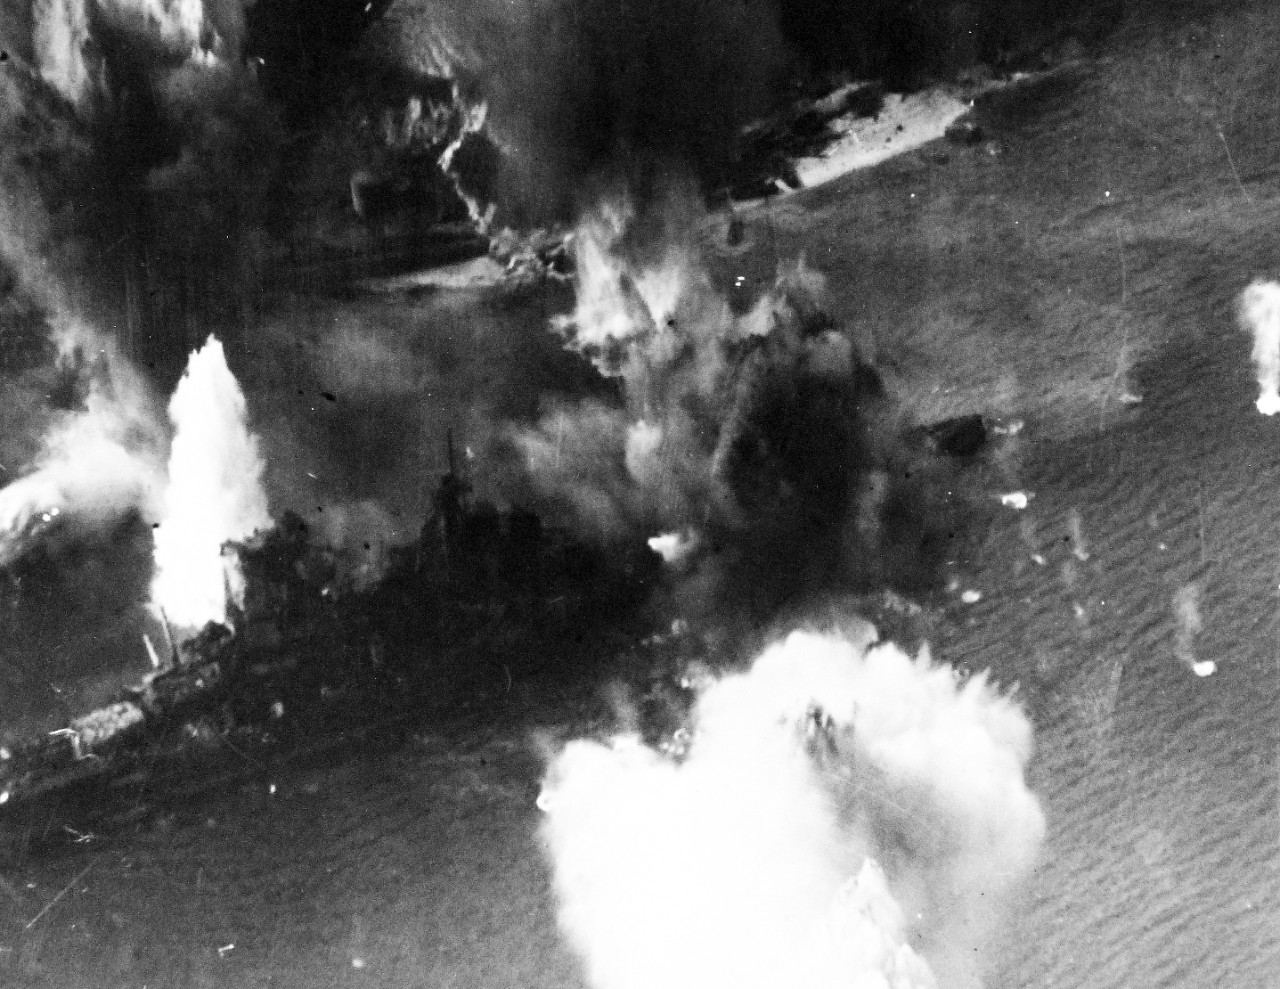 80-G-490224:  Raids on Japanese Home Islands, July 1945.   Japanese battleship Haruna under attack by American and British carrier planes in Kure Bay, Japan, July 28, 1945.  U.S. Navy Photograph, now in the collections of the National Archives. (2015/12/08).